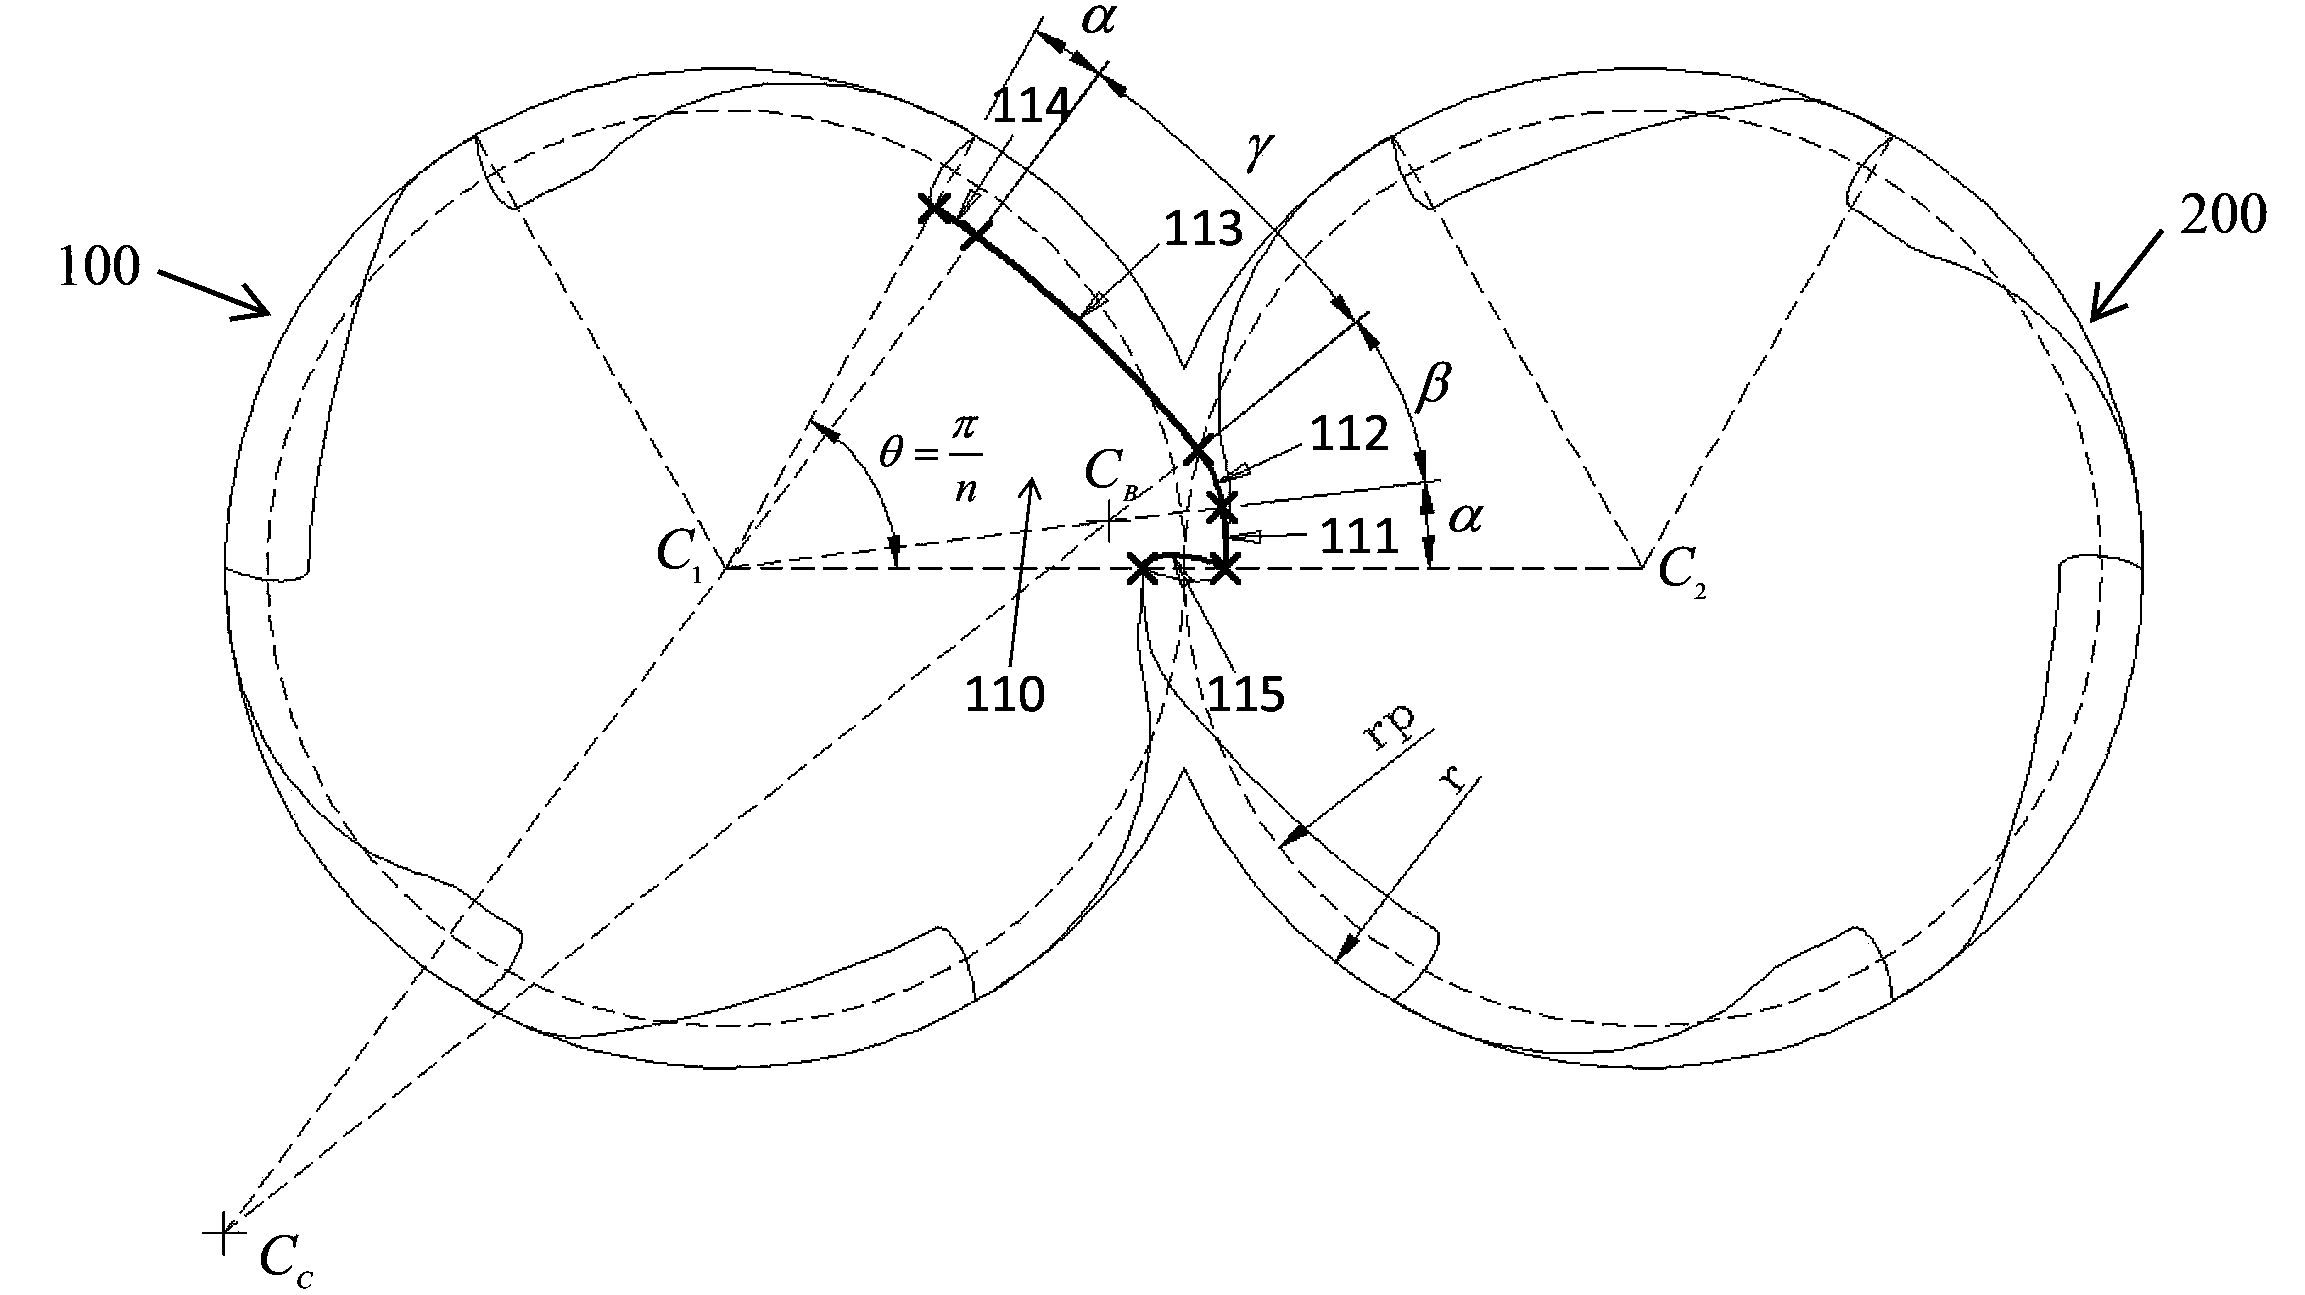 Claw type rotor pair apparatus with two rotors having the same shape